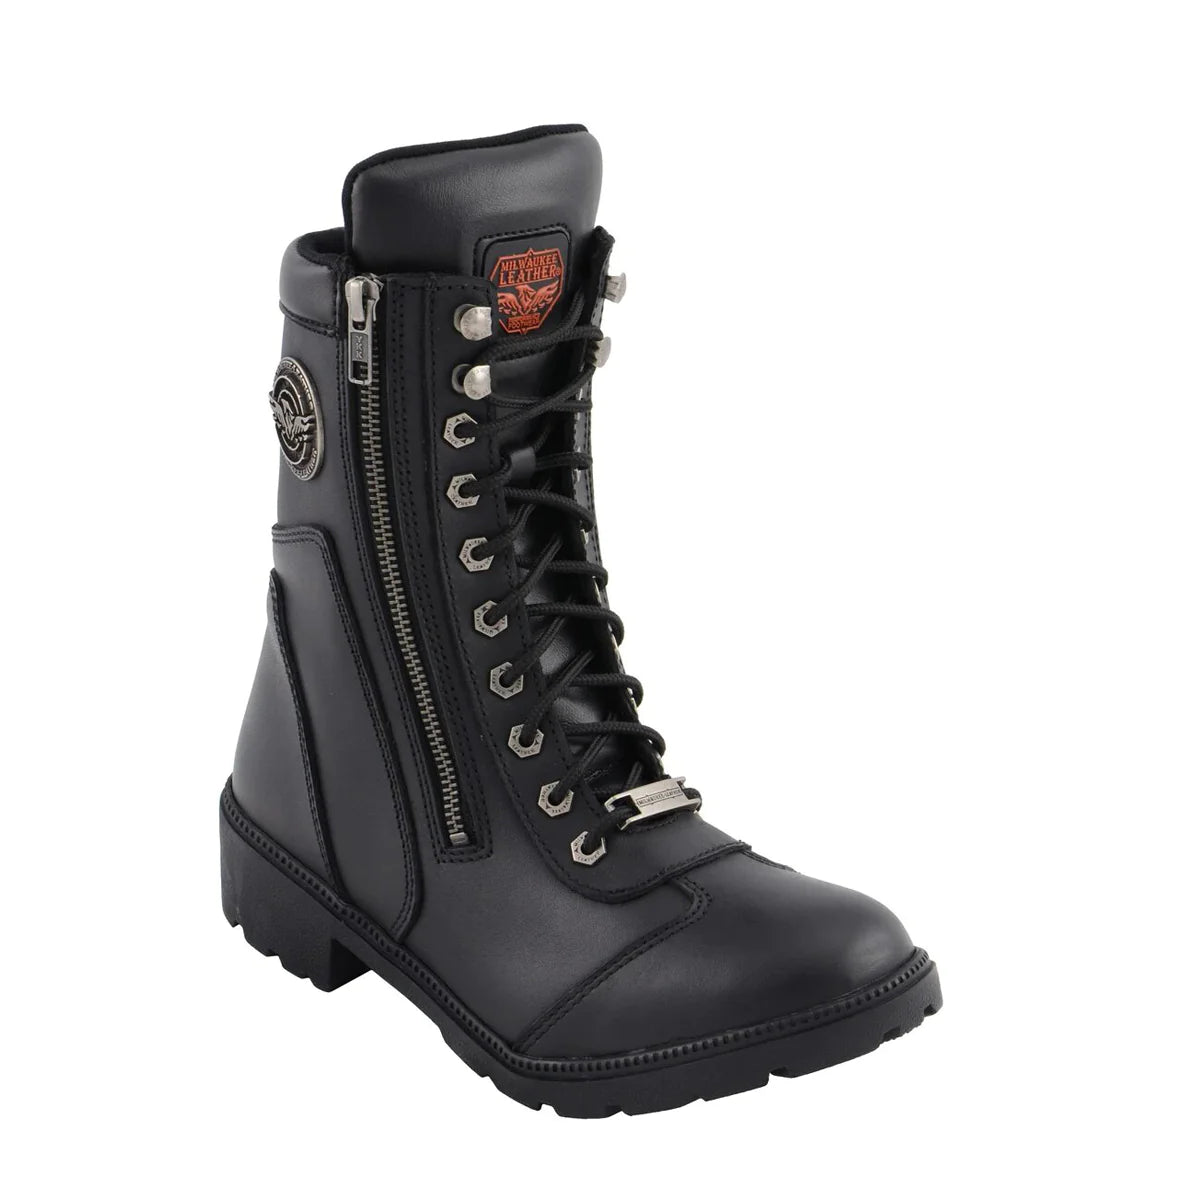 Womens Black Lace-Up Boots with Side Zipper Entry